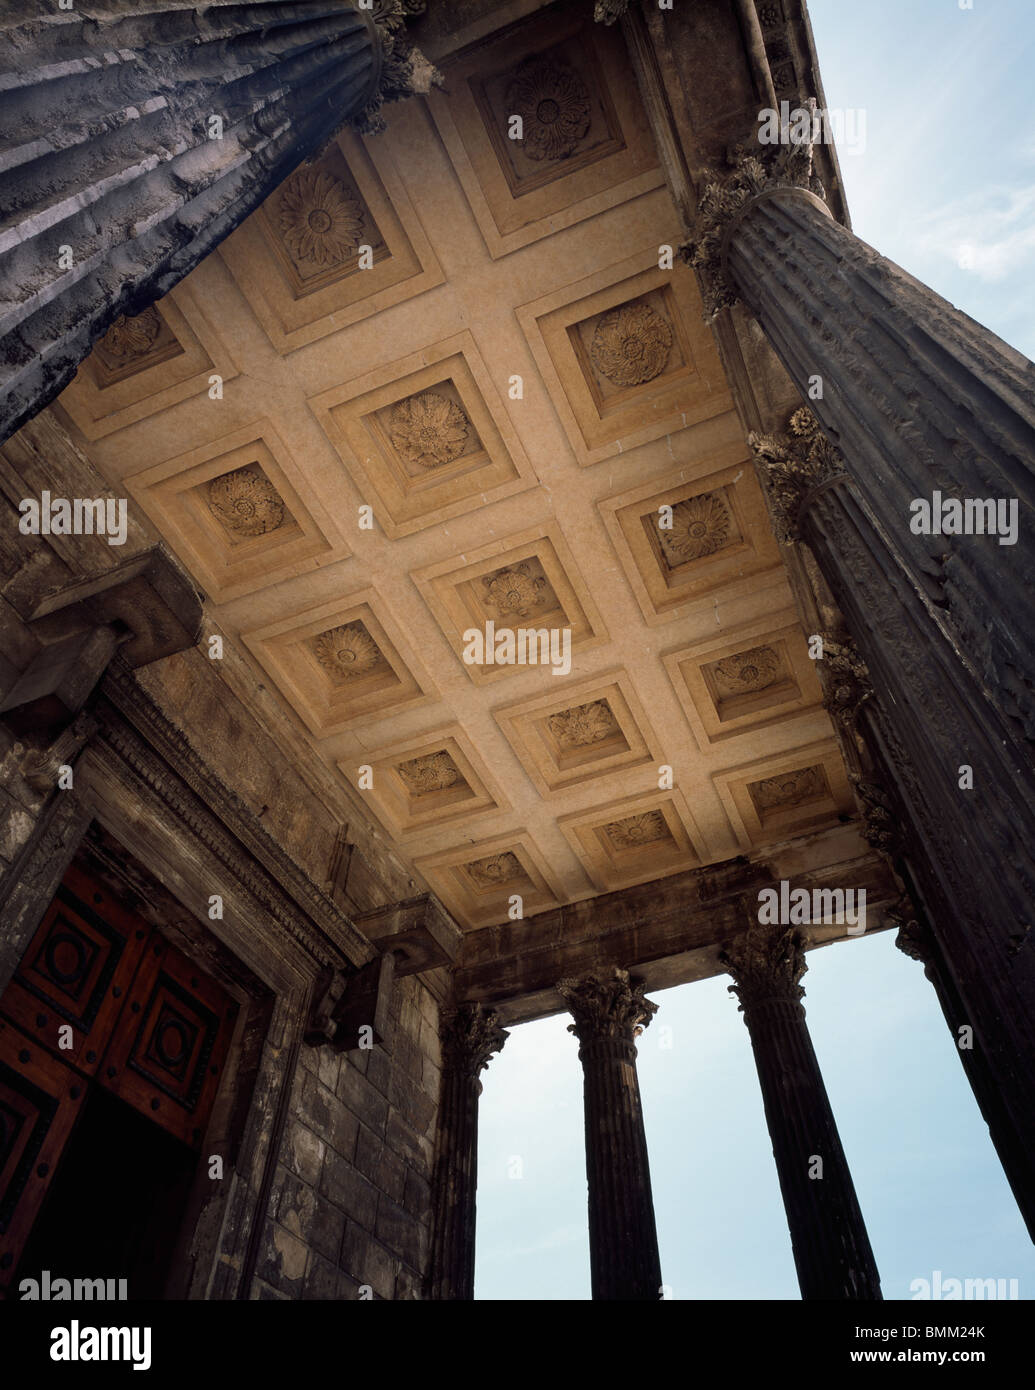 Maison Carree Nimes France Portico Interior With Coffering Stock Photo Alamy